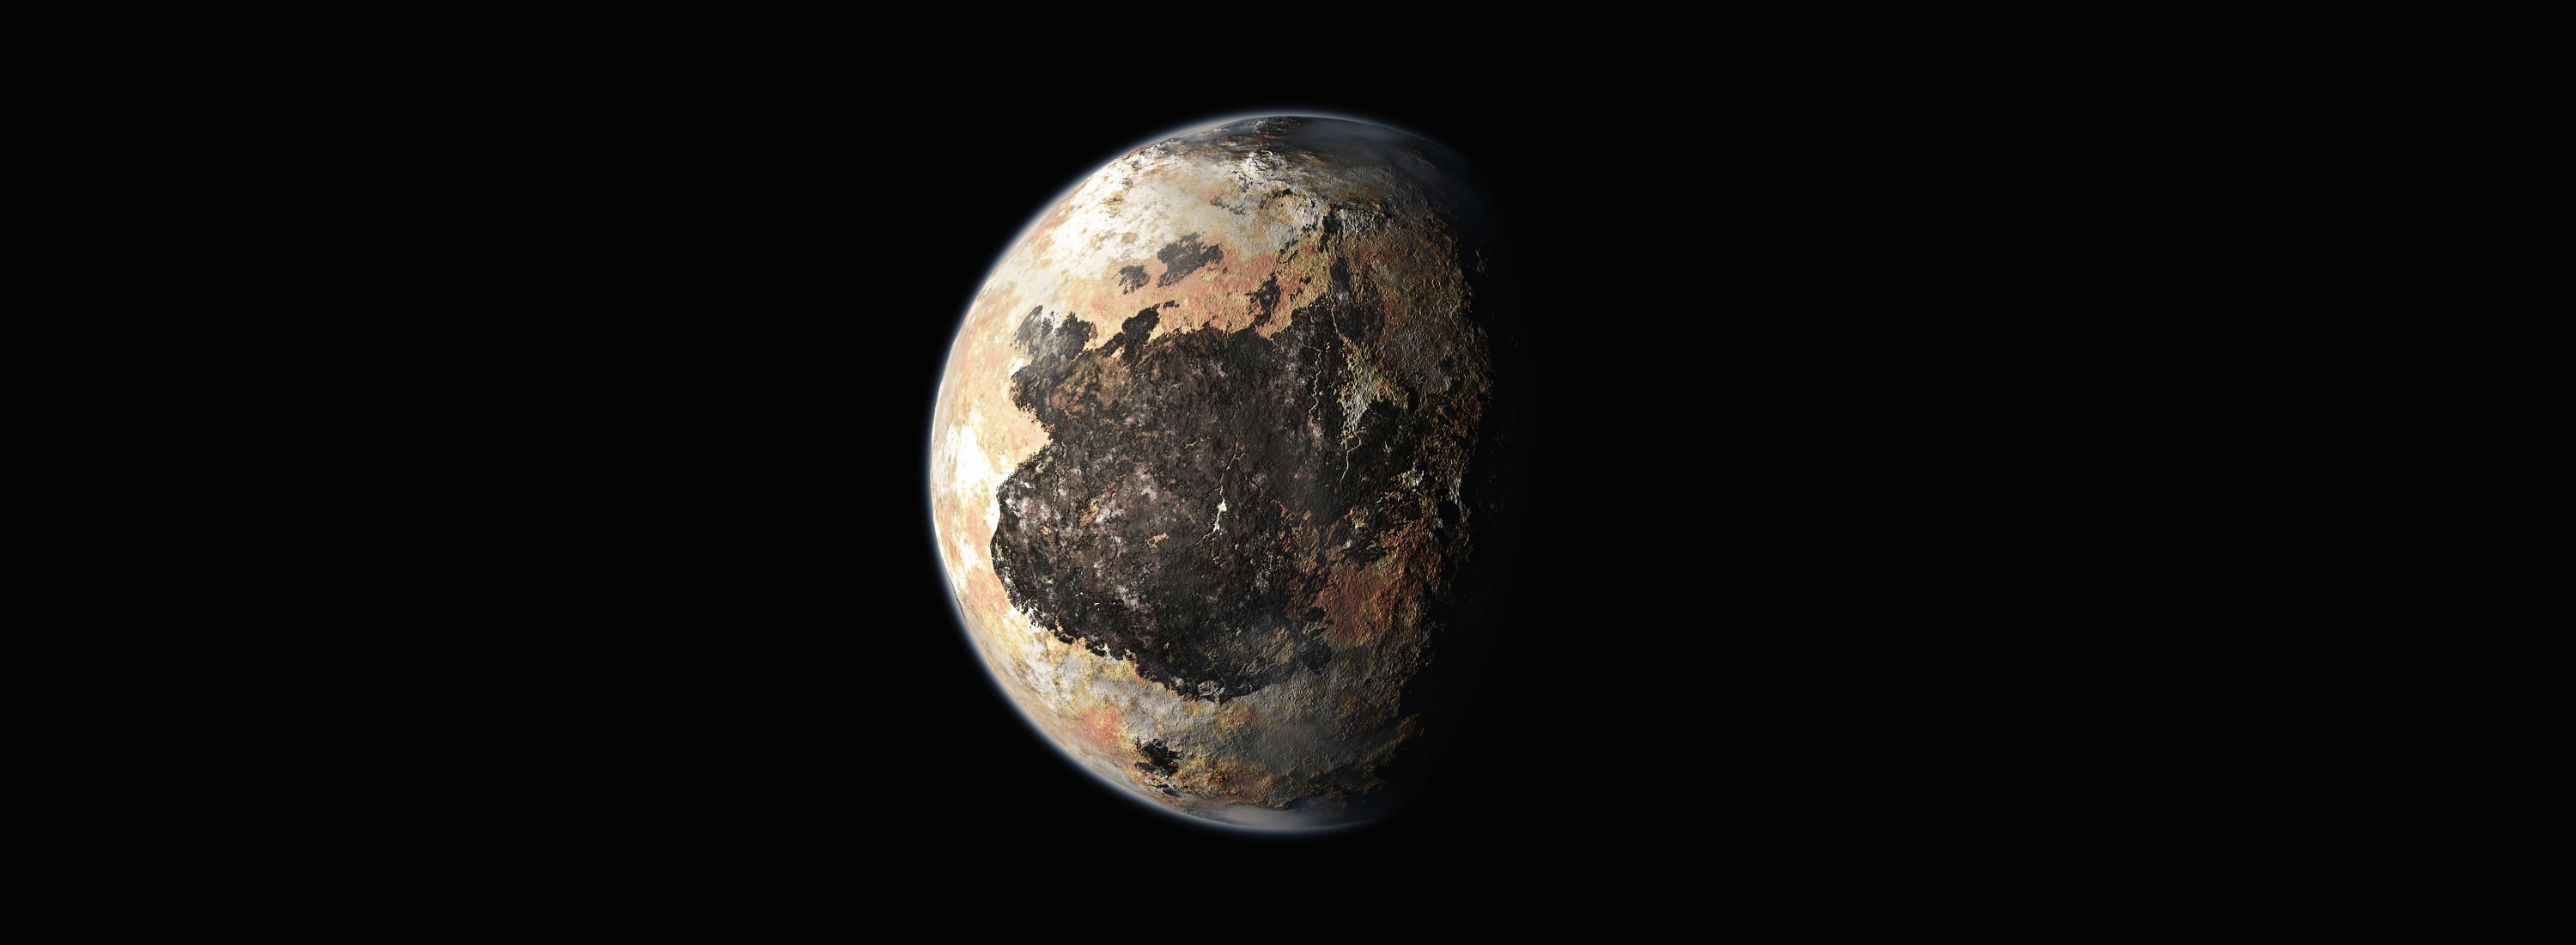 An artist's conception of Pluto, pre-New Horizons.